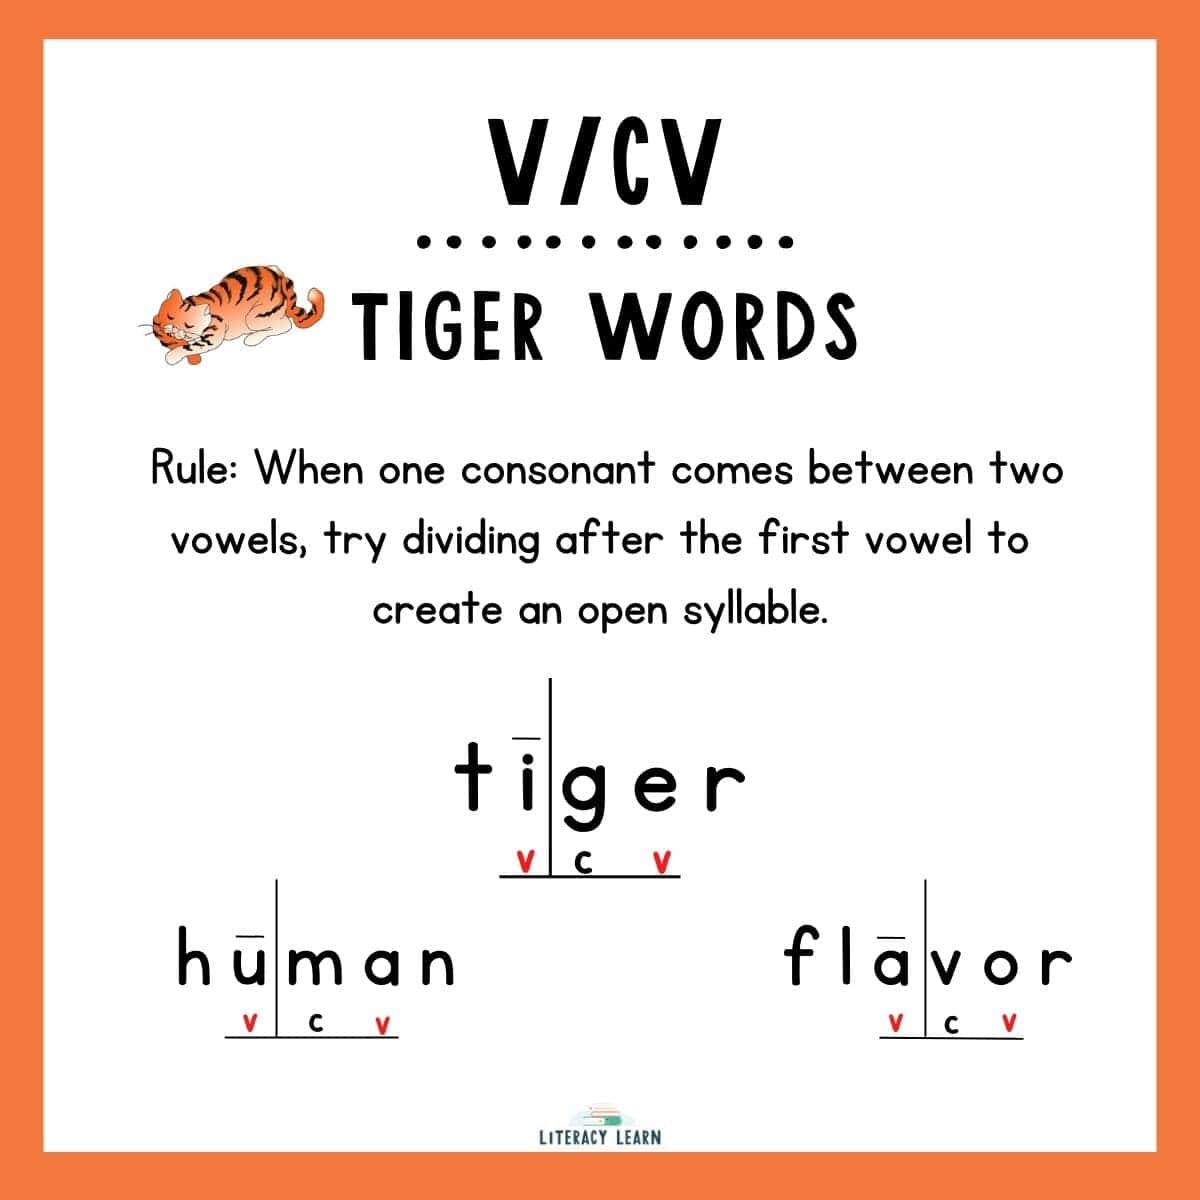 Graphic entitled "Tiger Words" with the rule and examples of words divided by V/CV pattern.